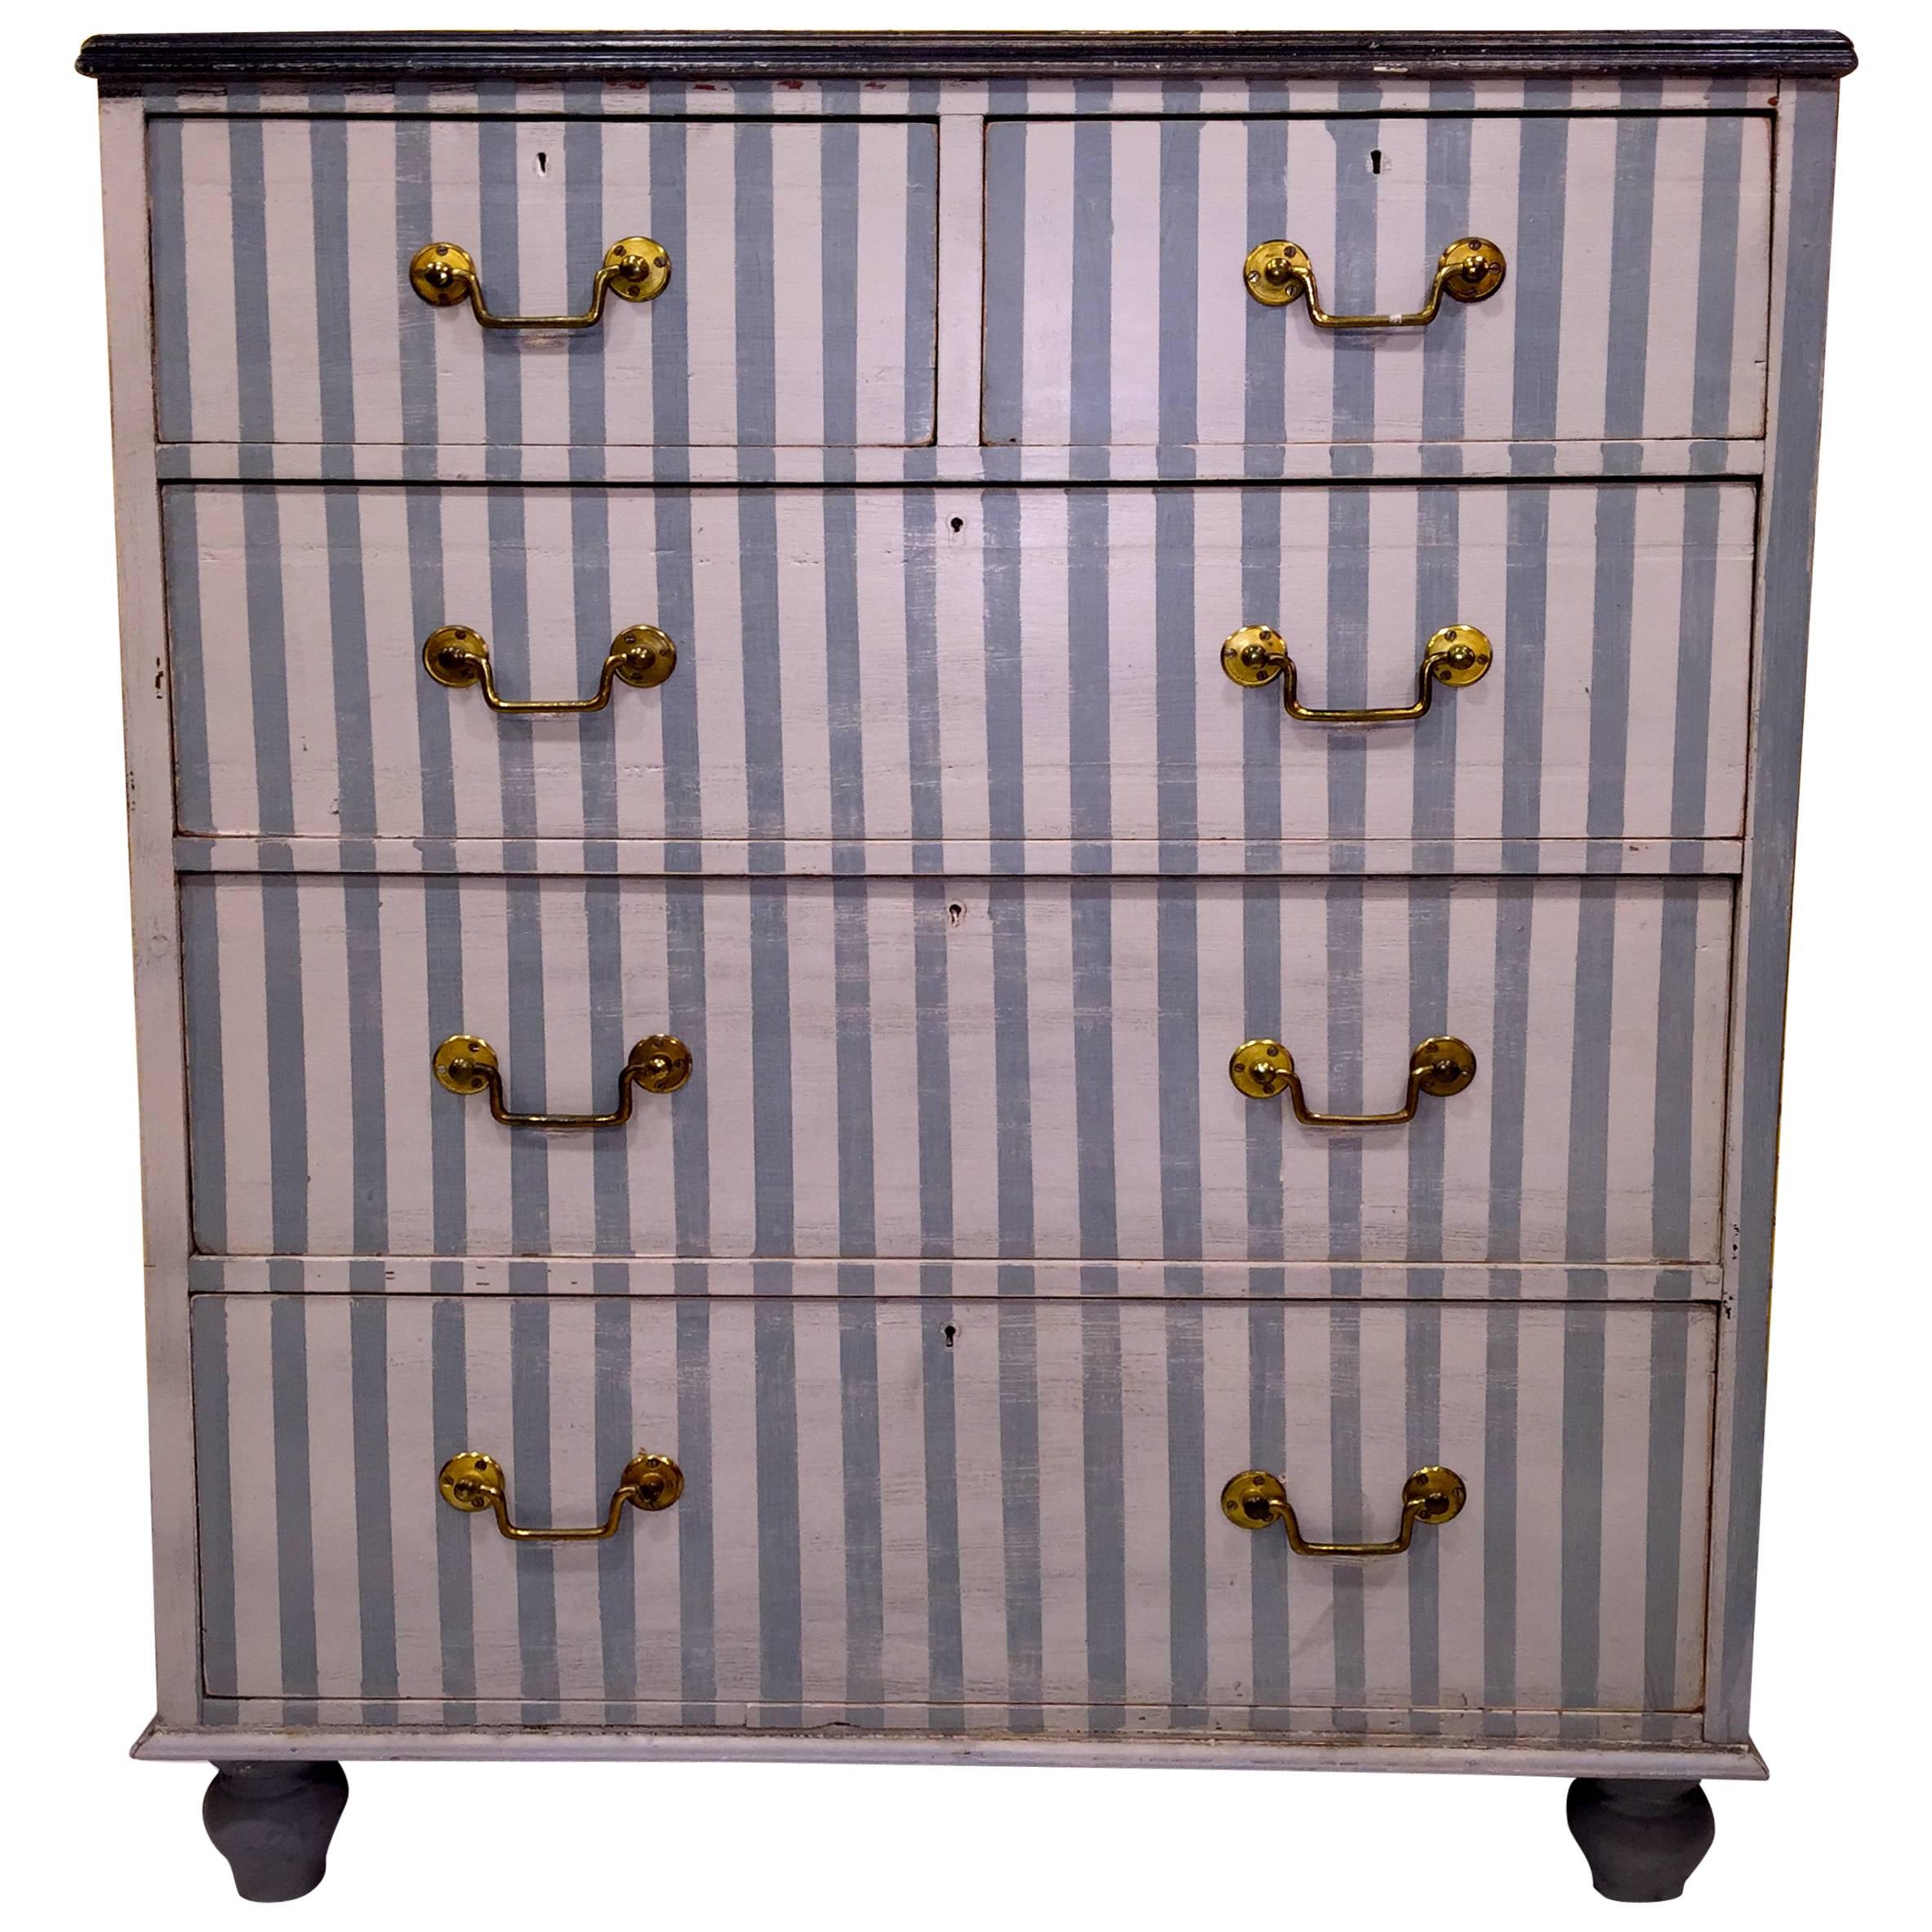 19th Century English Painted Chest of Drawers with Light Blue Strips